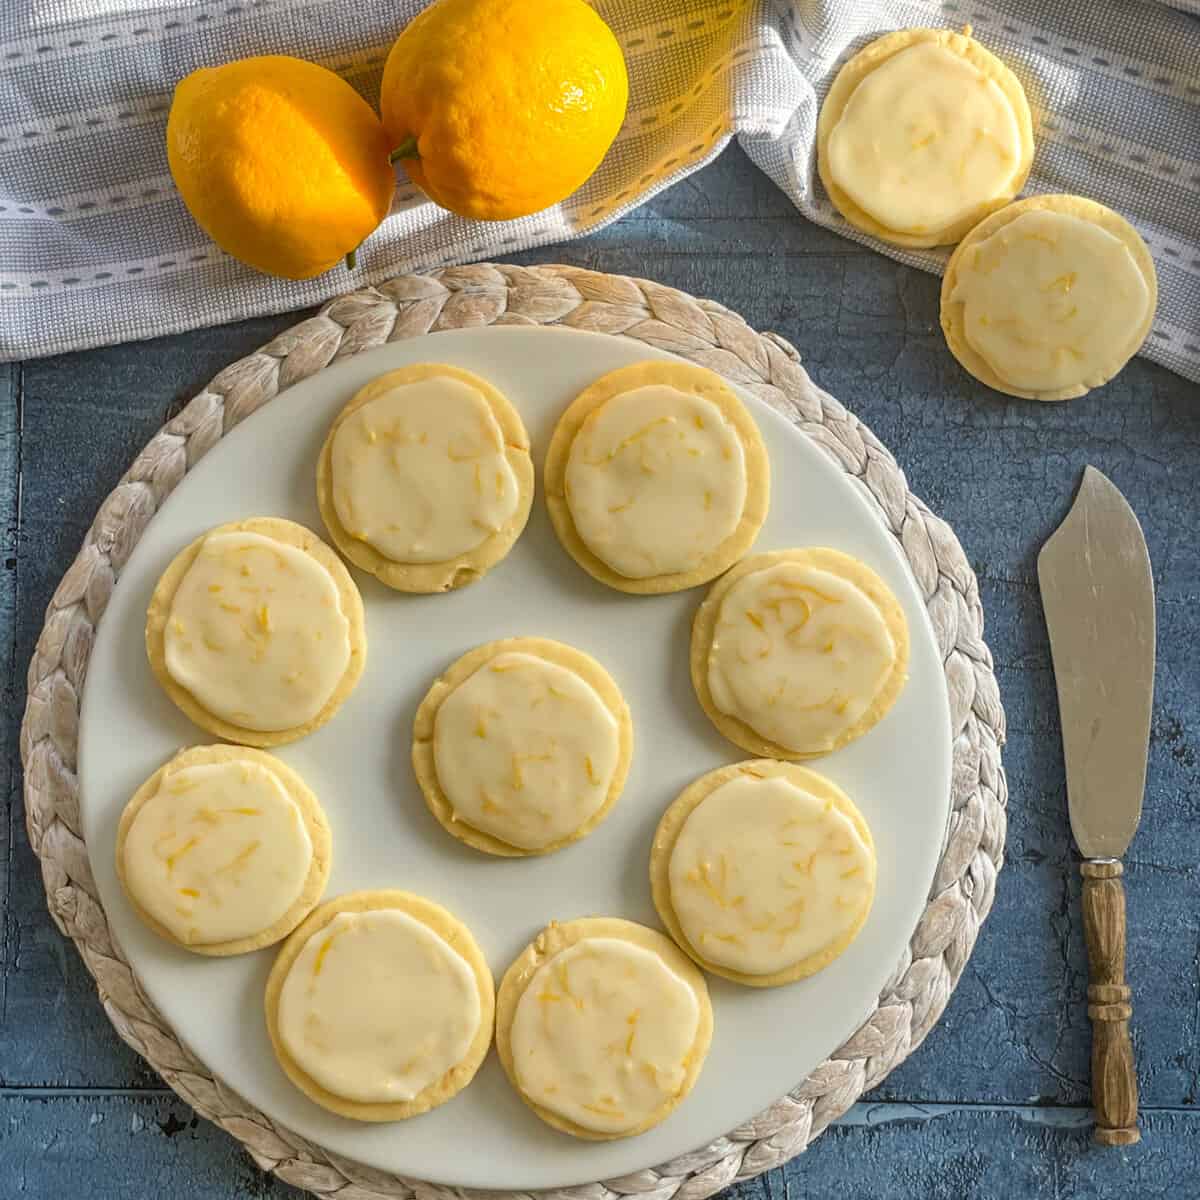 Iced lemon shortbread on a white platter, with fresh lemons and a blue background